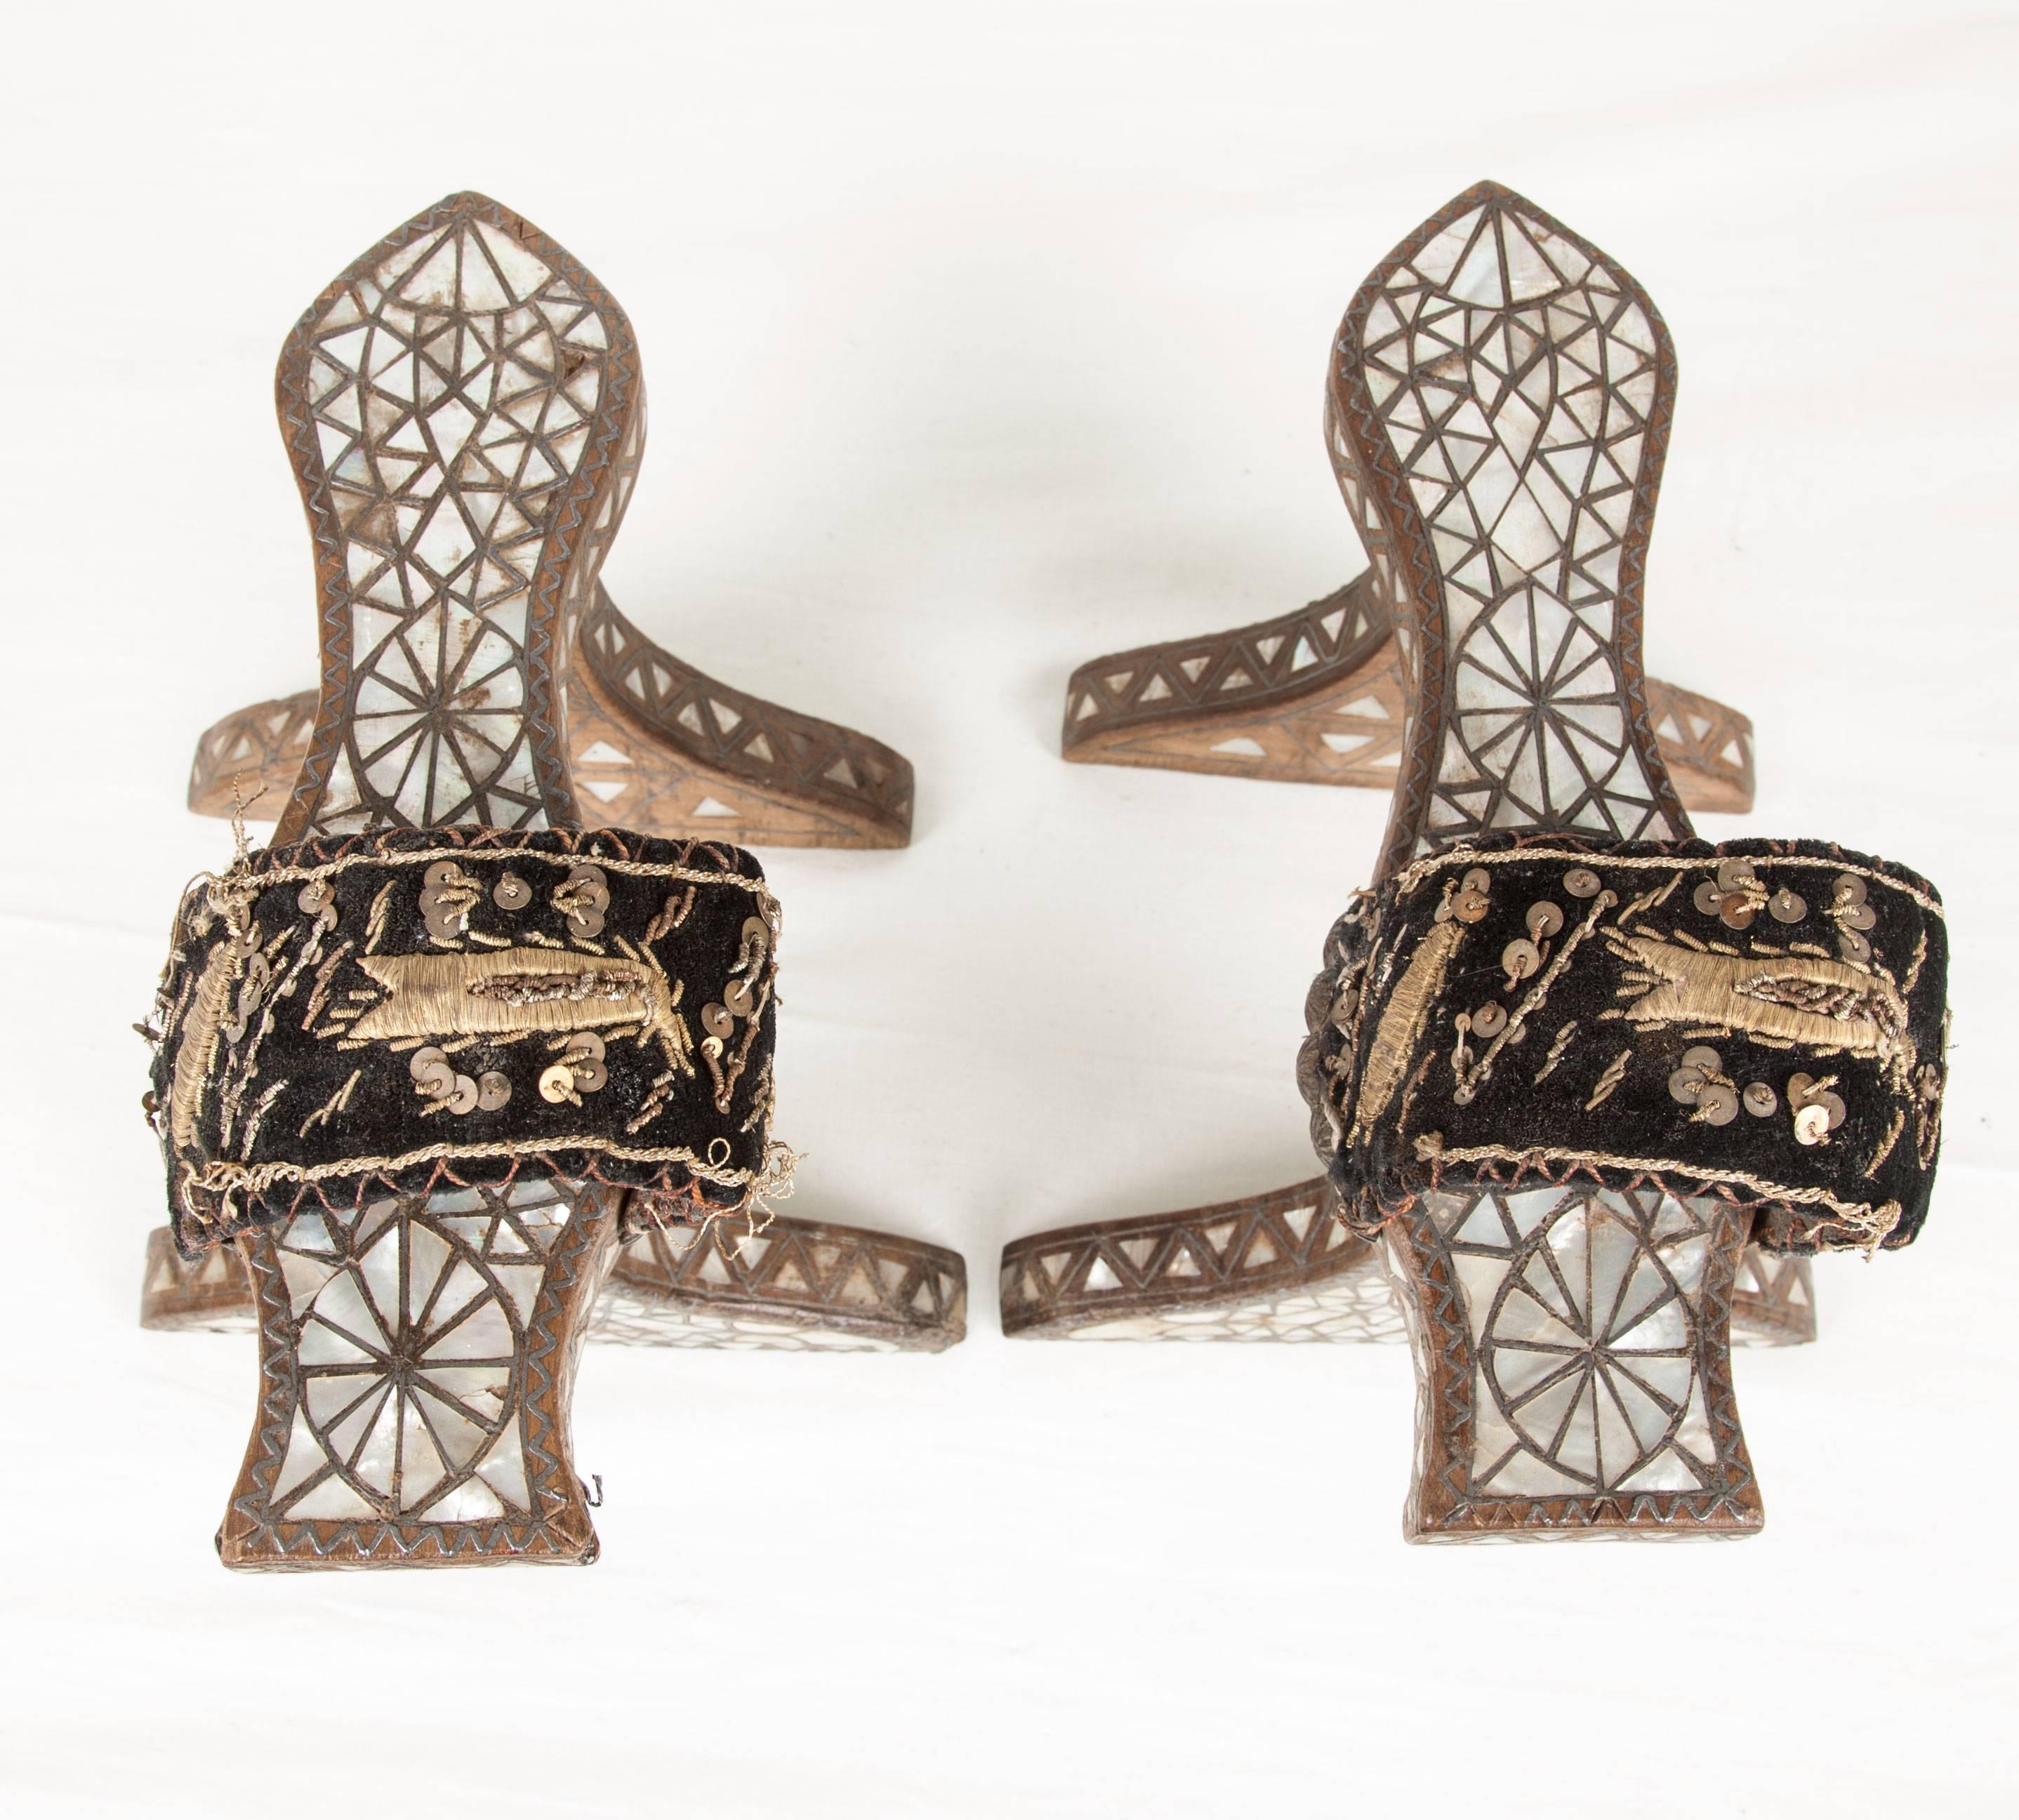 The base of the clogs (slippers) or nalin is carved out of wood (walnut wood) and decorated with mother-of-pearl. The strap is embroidered in silver thread on velvet. The height is 6.2''/16 cm, The length is 9.4'' /24 cm.

These items are one of